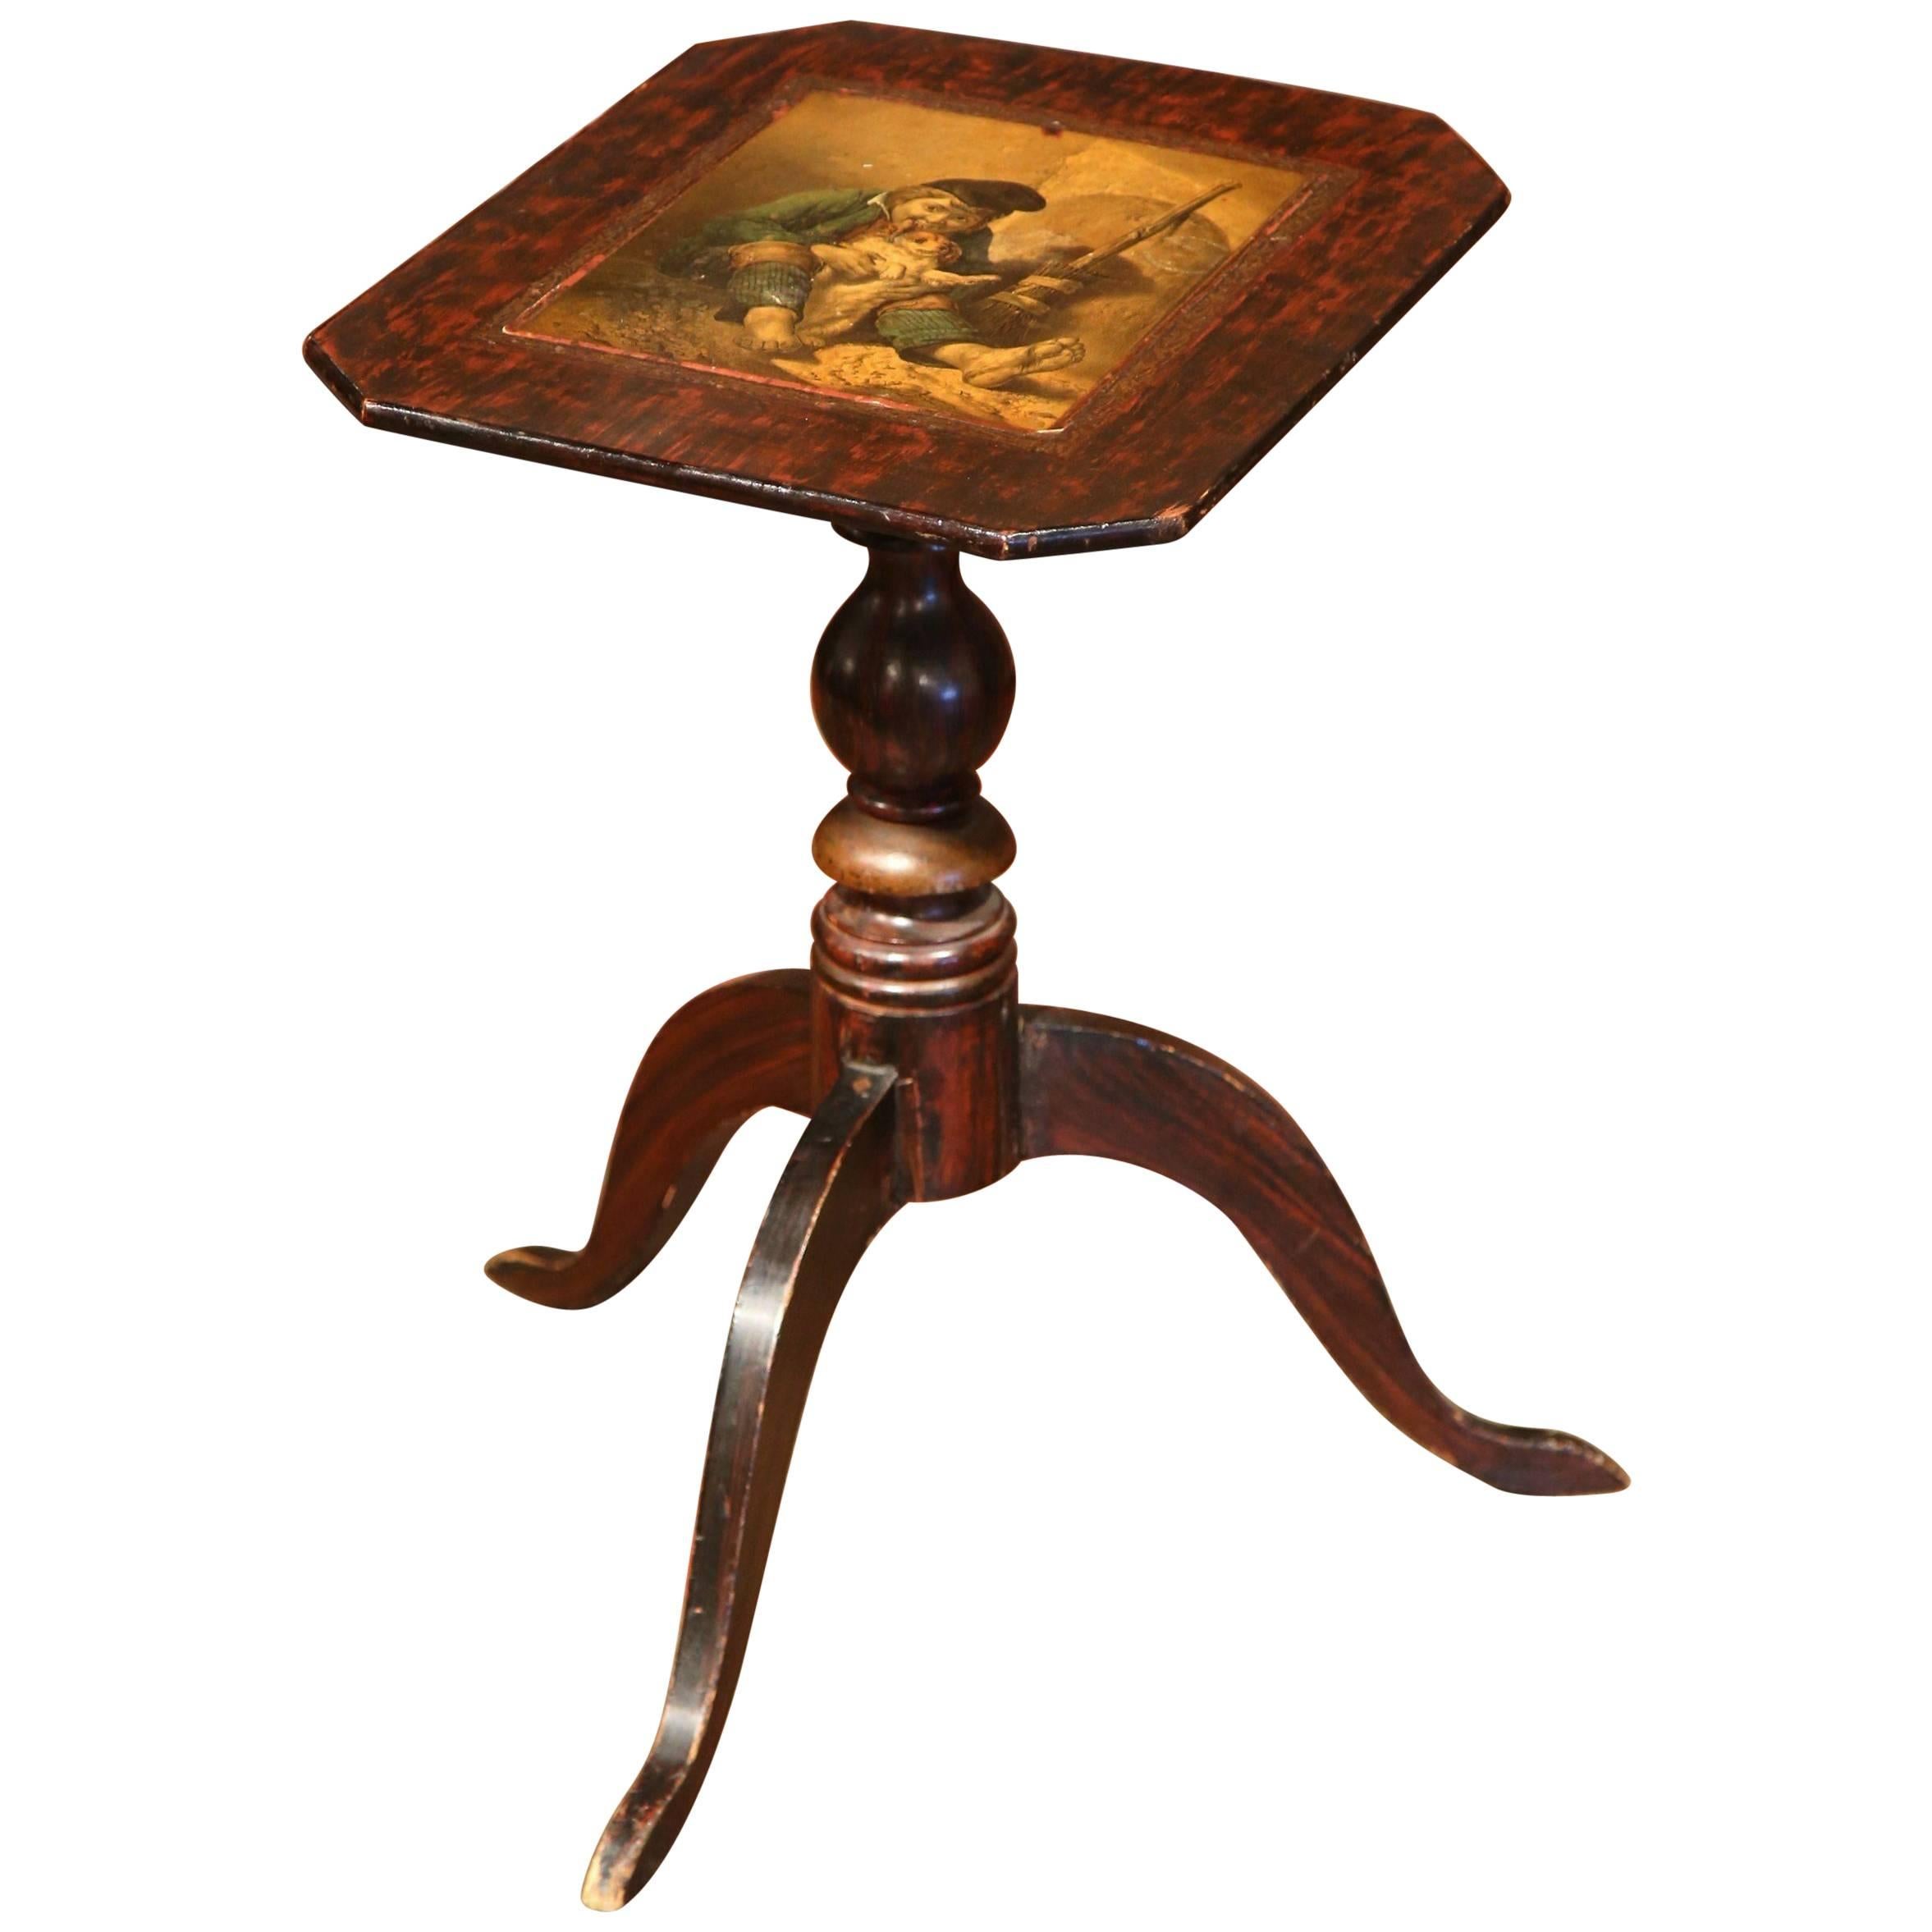 19th Century English Carved Mahogany Tea Table with Painted Scene on the Top